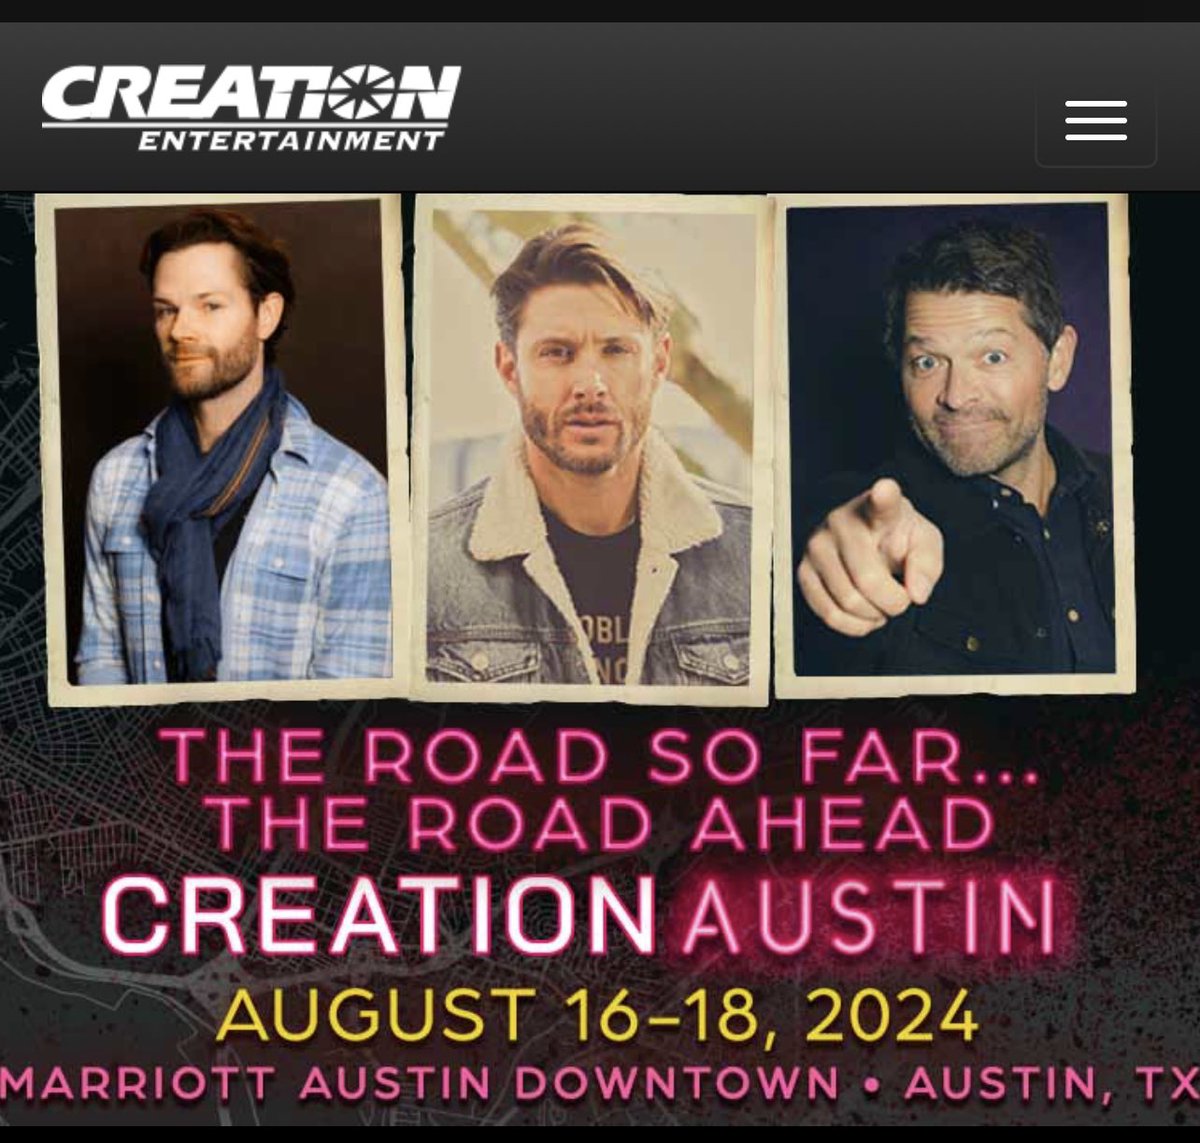 Just a heads up. ‘for the love of fantasy’ is scheduled the same dates as creation’s Austin con. 
I’m sure FTLOF con will have a fabulous line up, but they can’t book Jensen when he’s already booked elsewhere 🤷‍♀️ (if they mean for a different con, they really need to say so!)